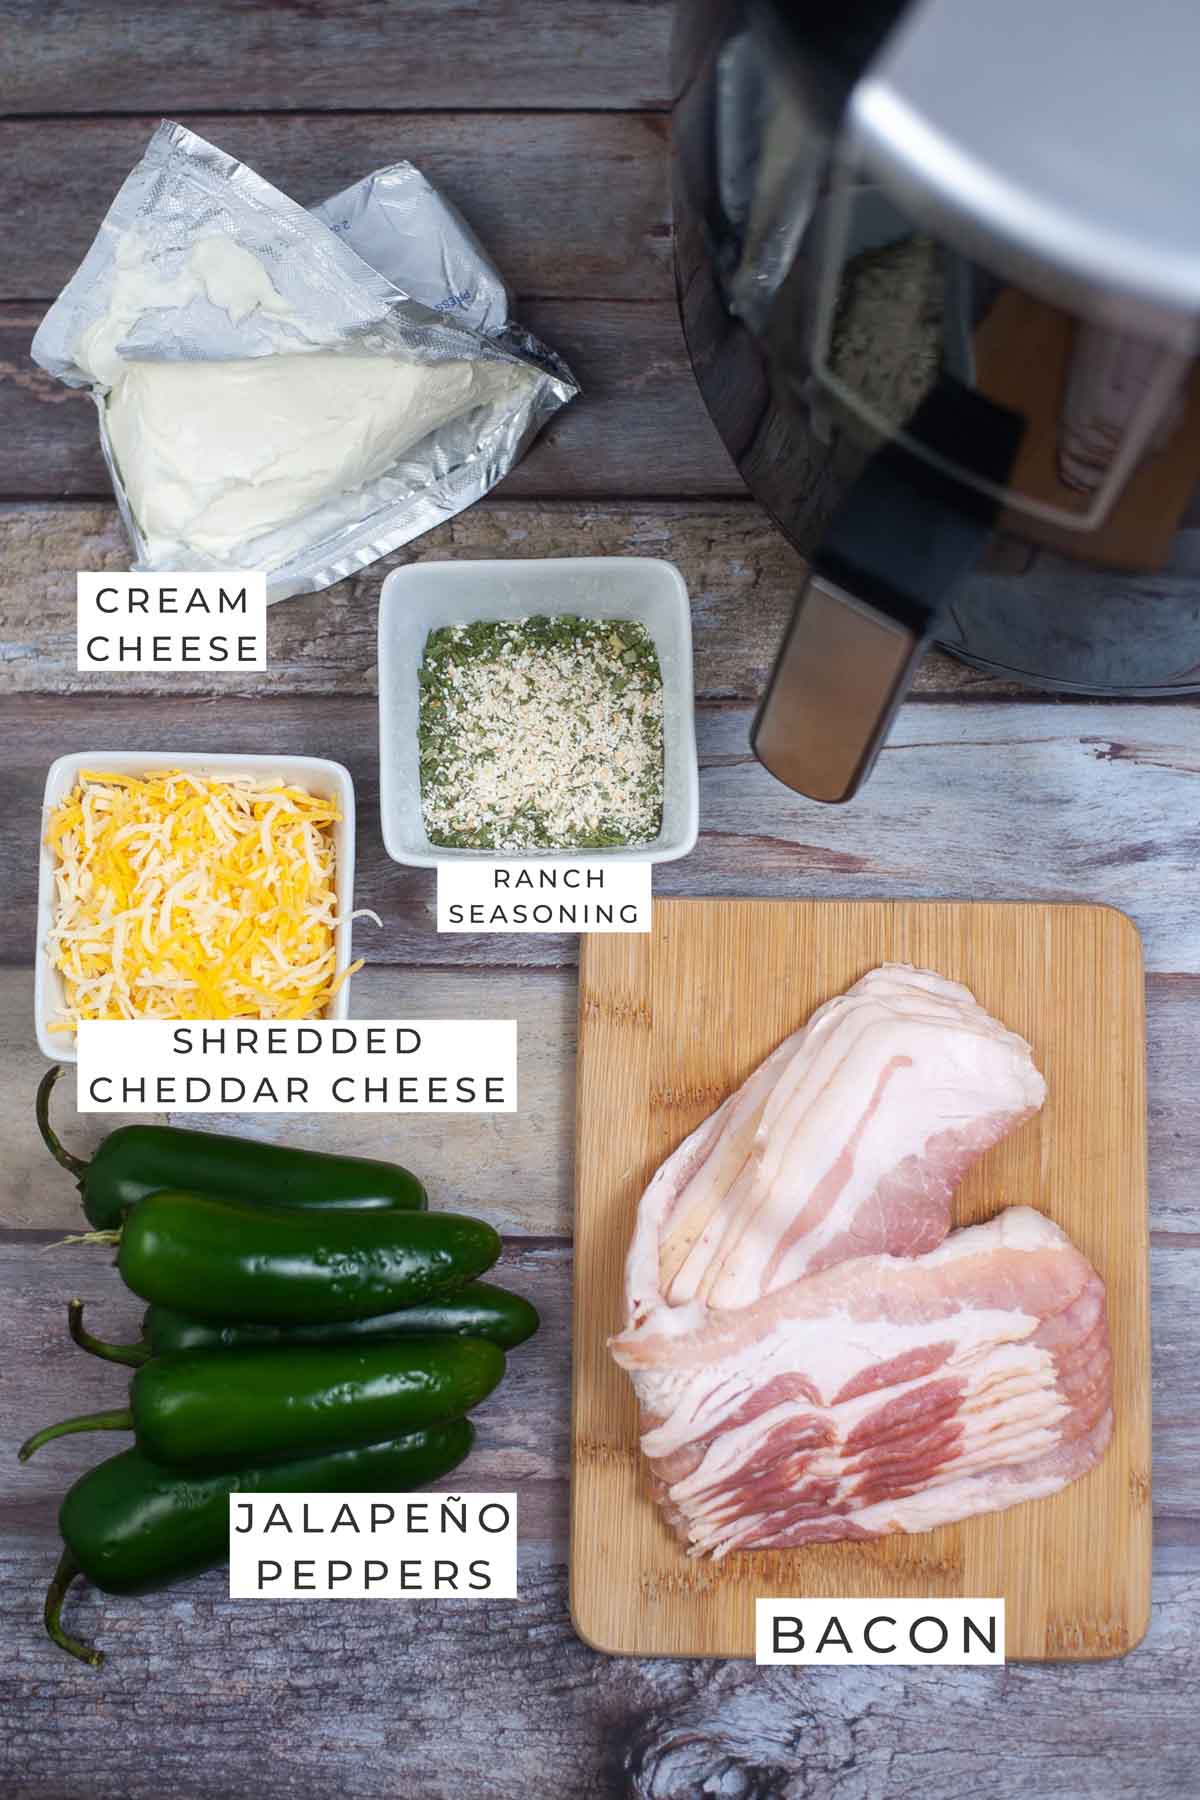 Labeled ingredients for the jalapeño poppers.